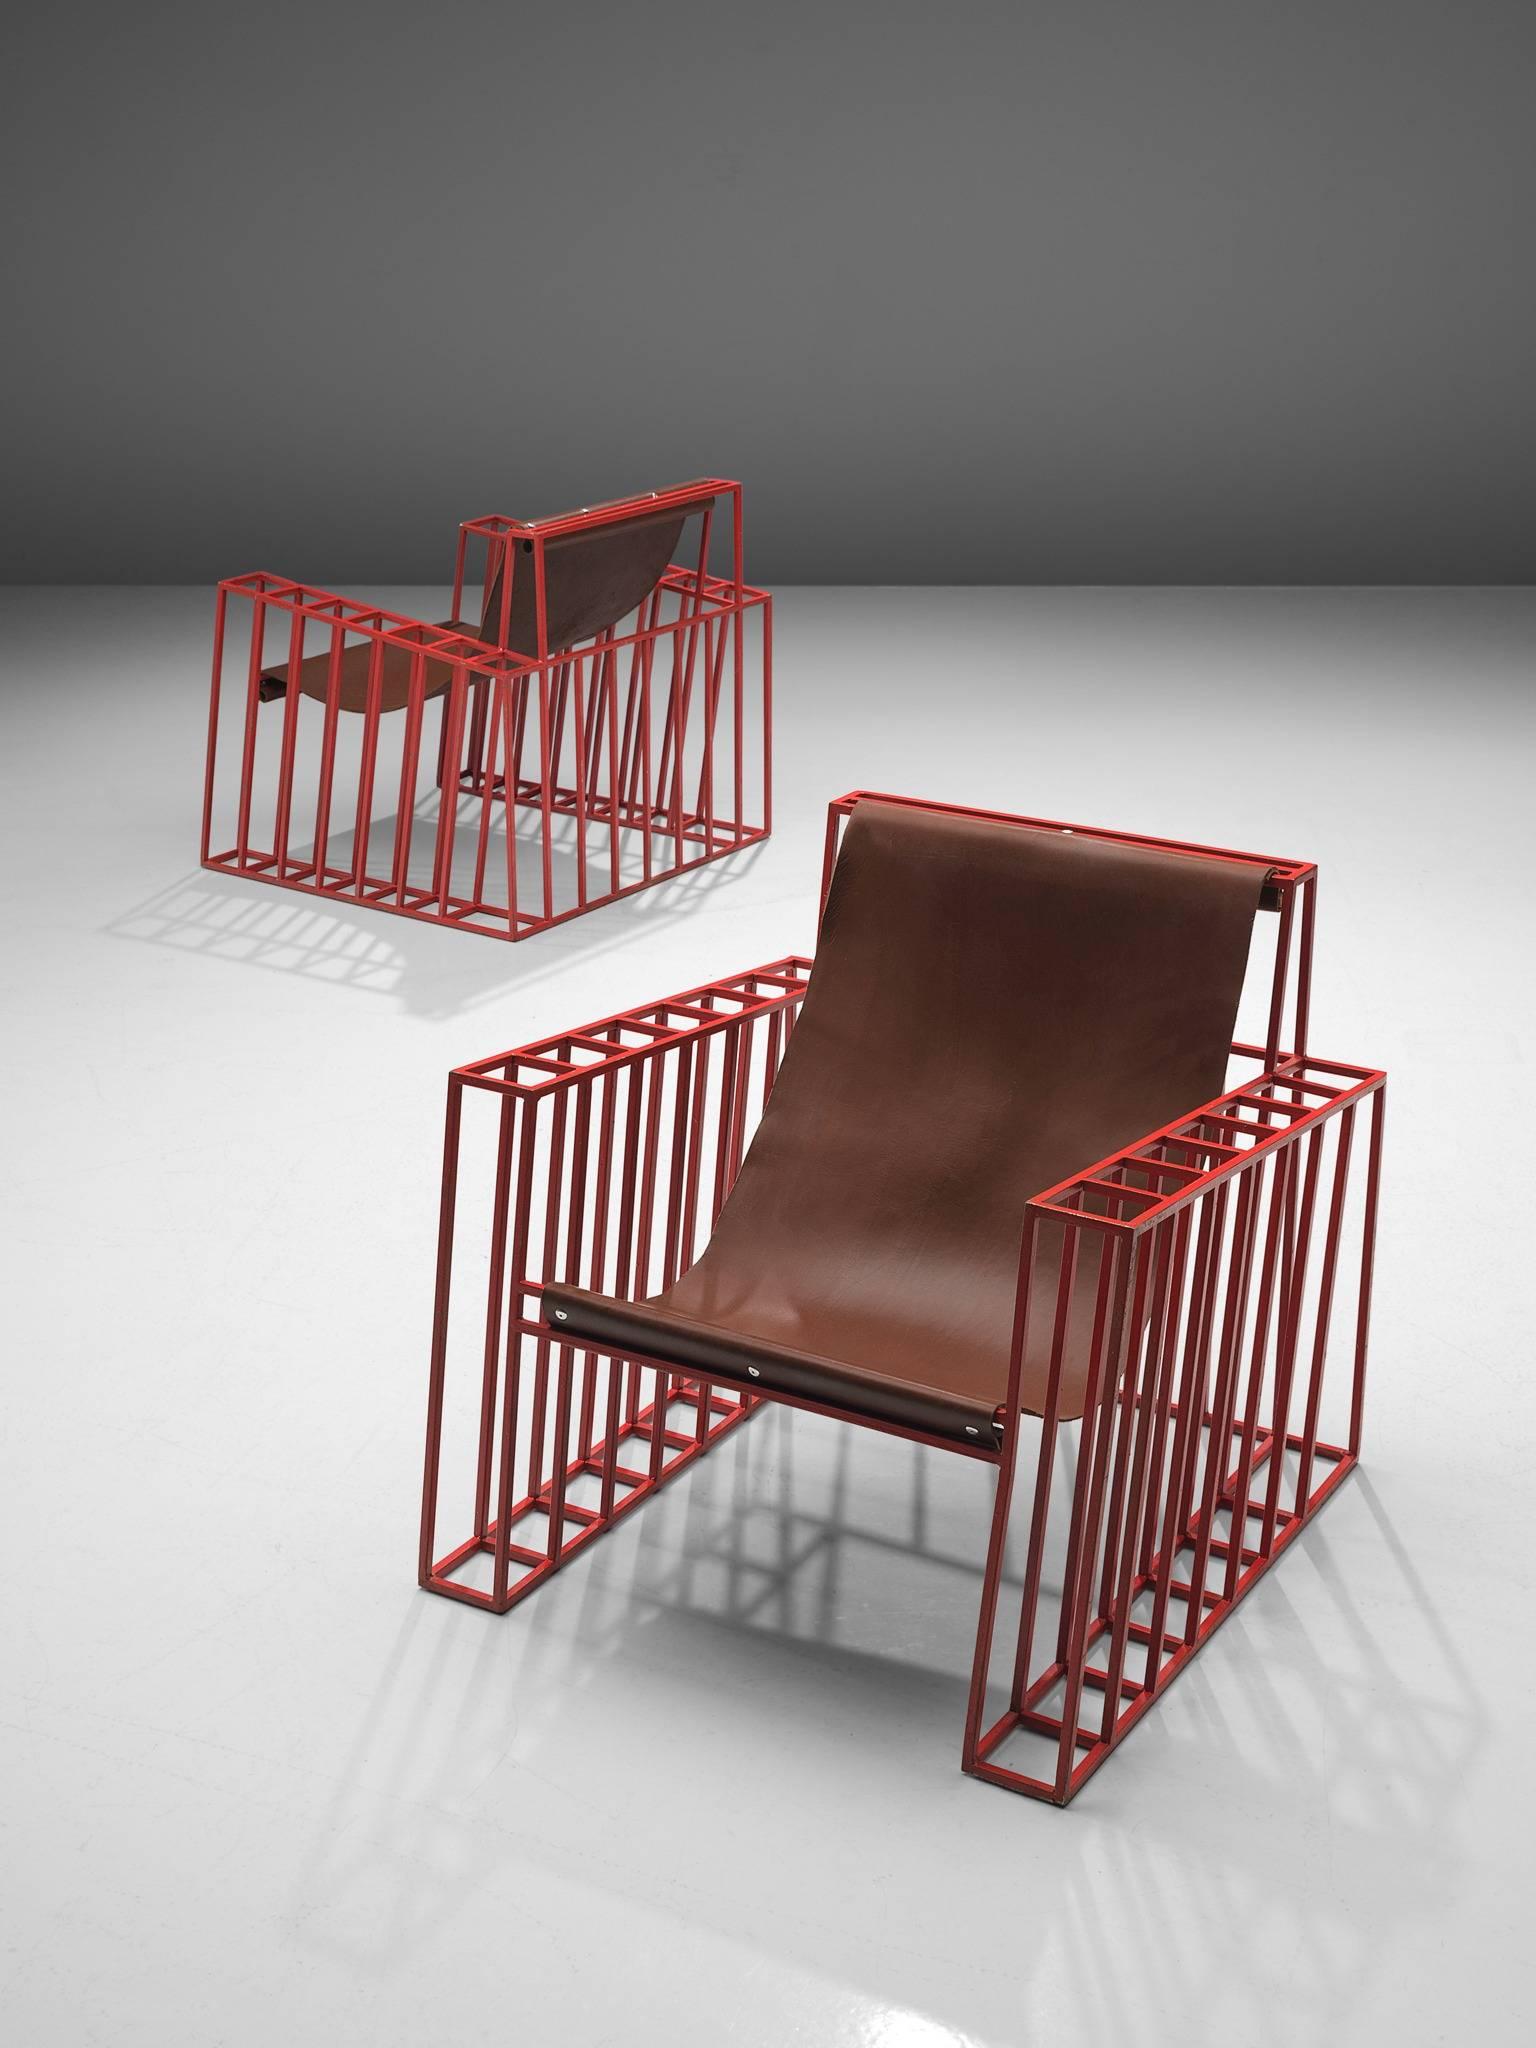 Lounge chairs, leather and red coated metal, 1970s, Europe.

These incredibly sculptural chairs are rare and sculptural. They are the pinnacle of extravagance subjective design from the 1970s in Europe. The red frame is created as a basket with